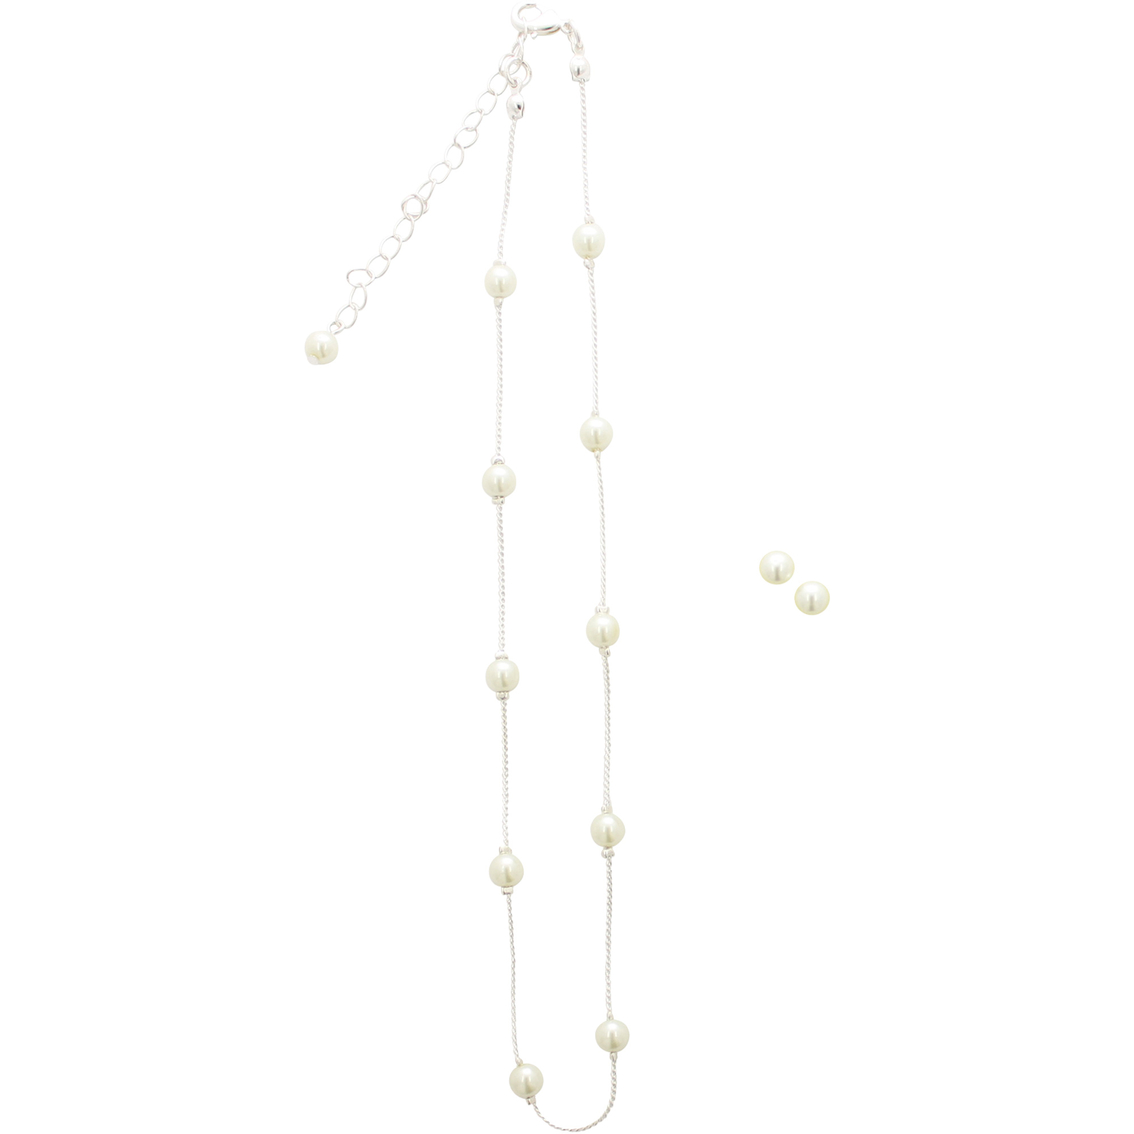 Cherish White Faux Pearl Tincup Necklace and 6mm Stud Pearl Earring Set - Image 2 of 2